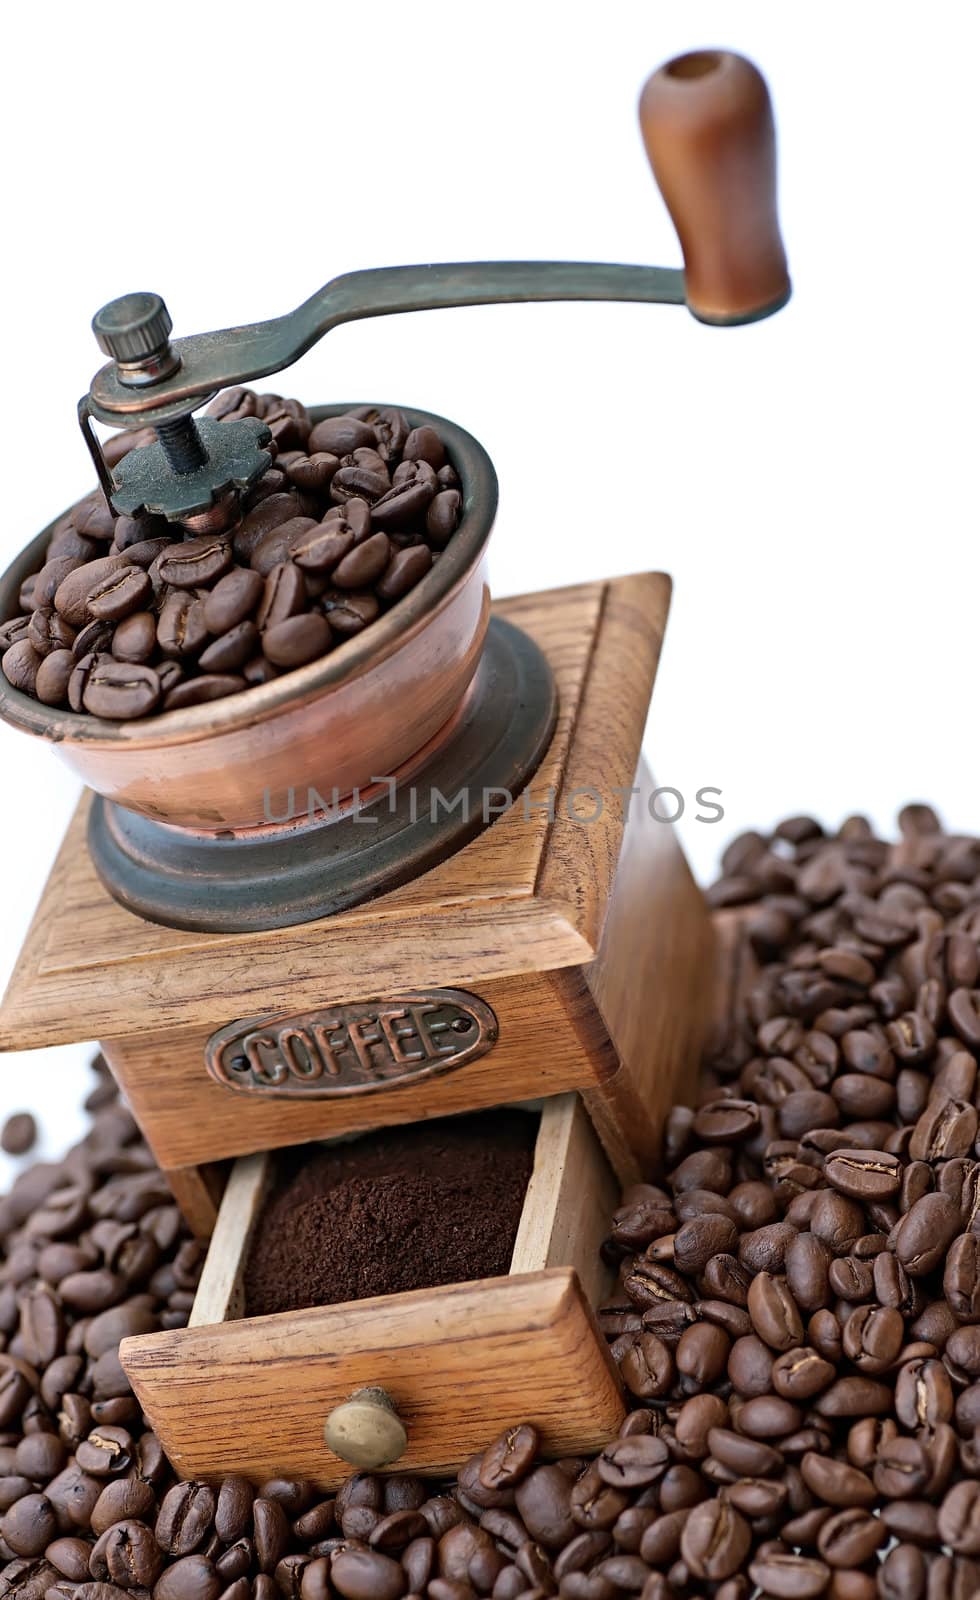 Old coffee grinder with beans